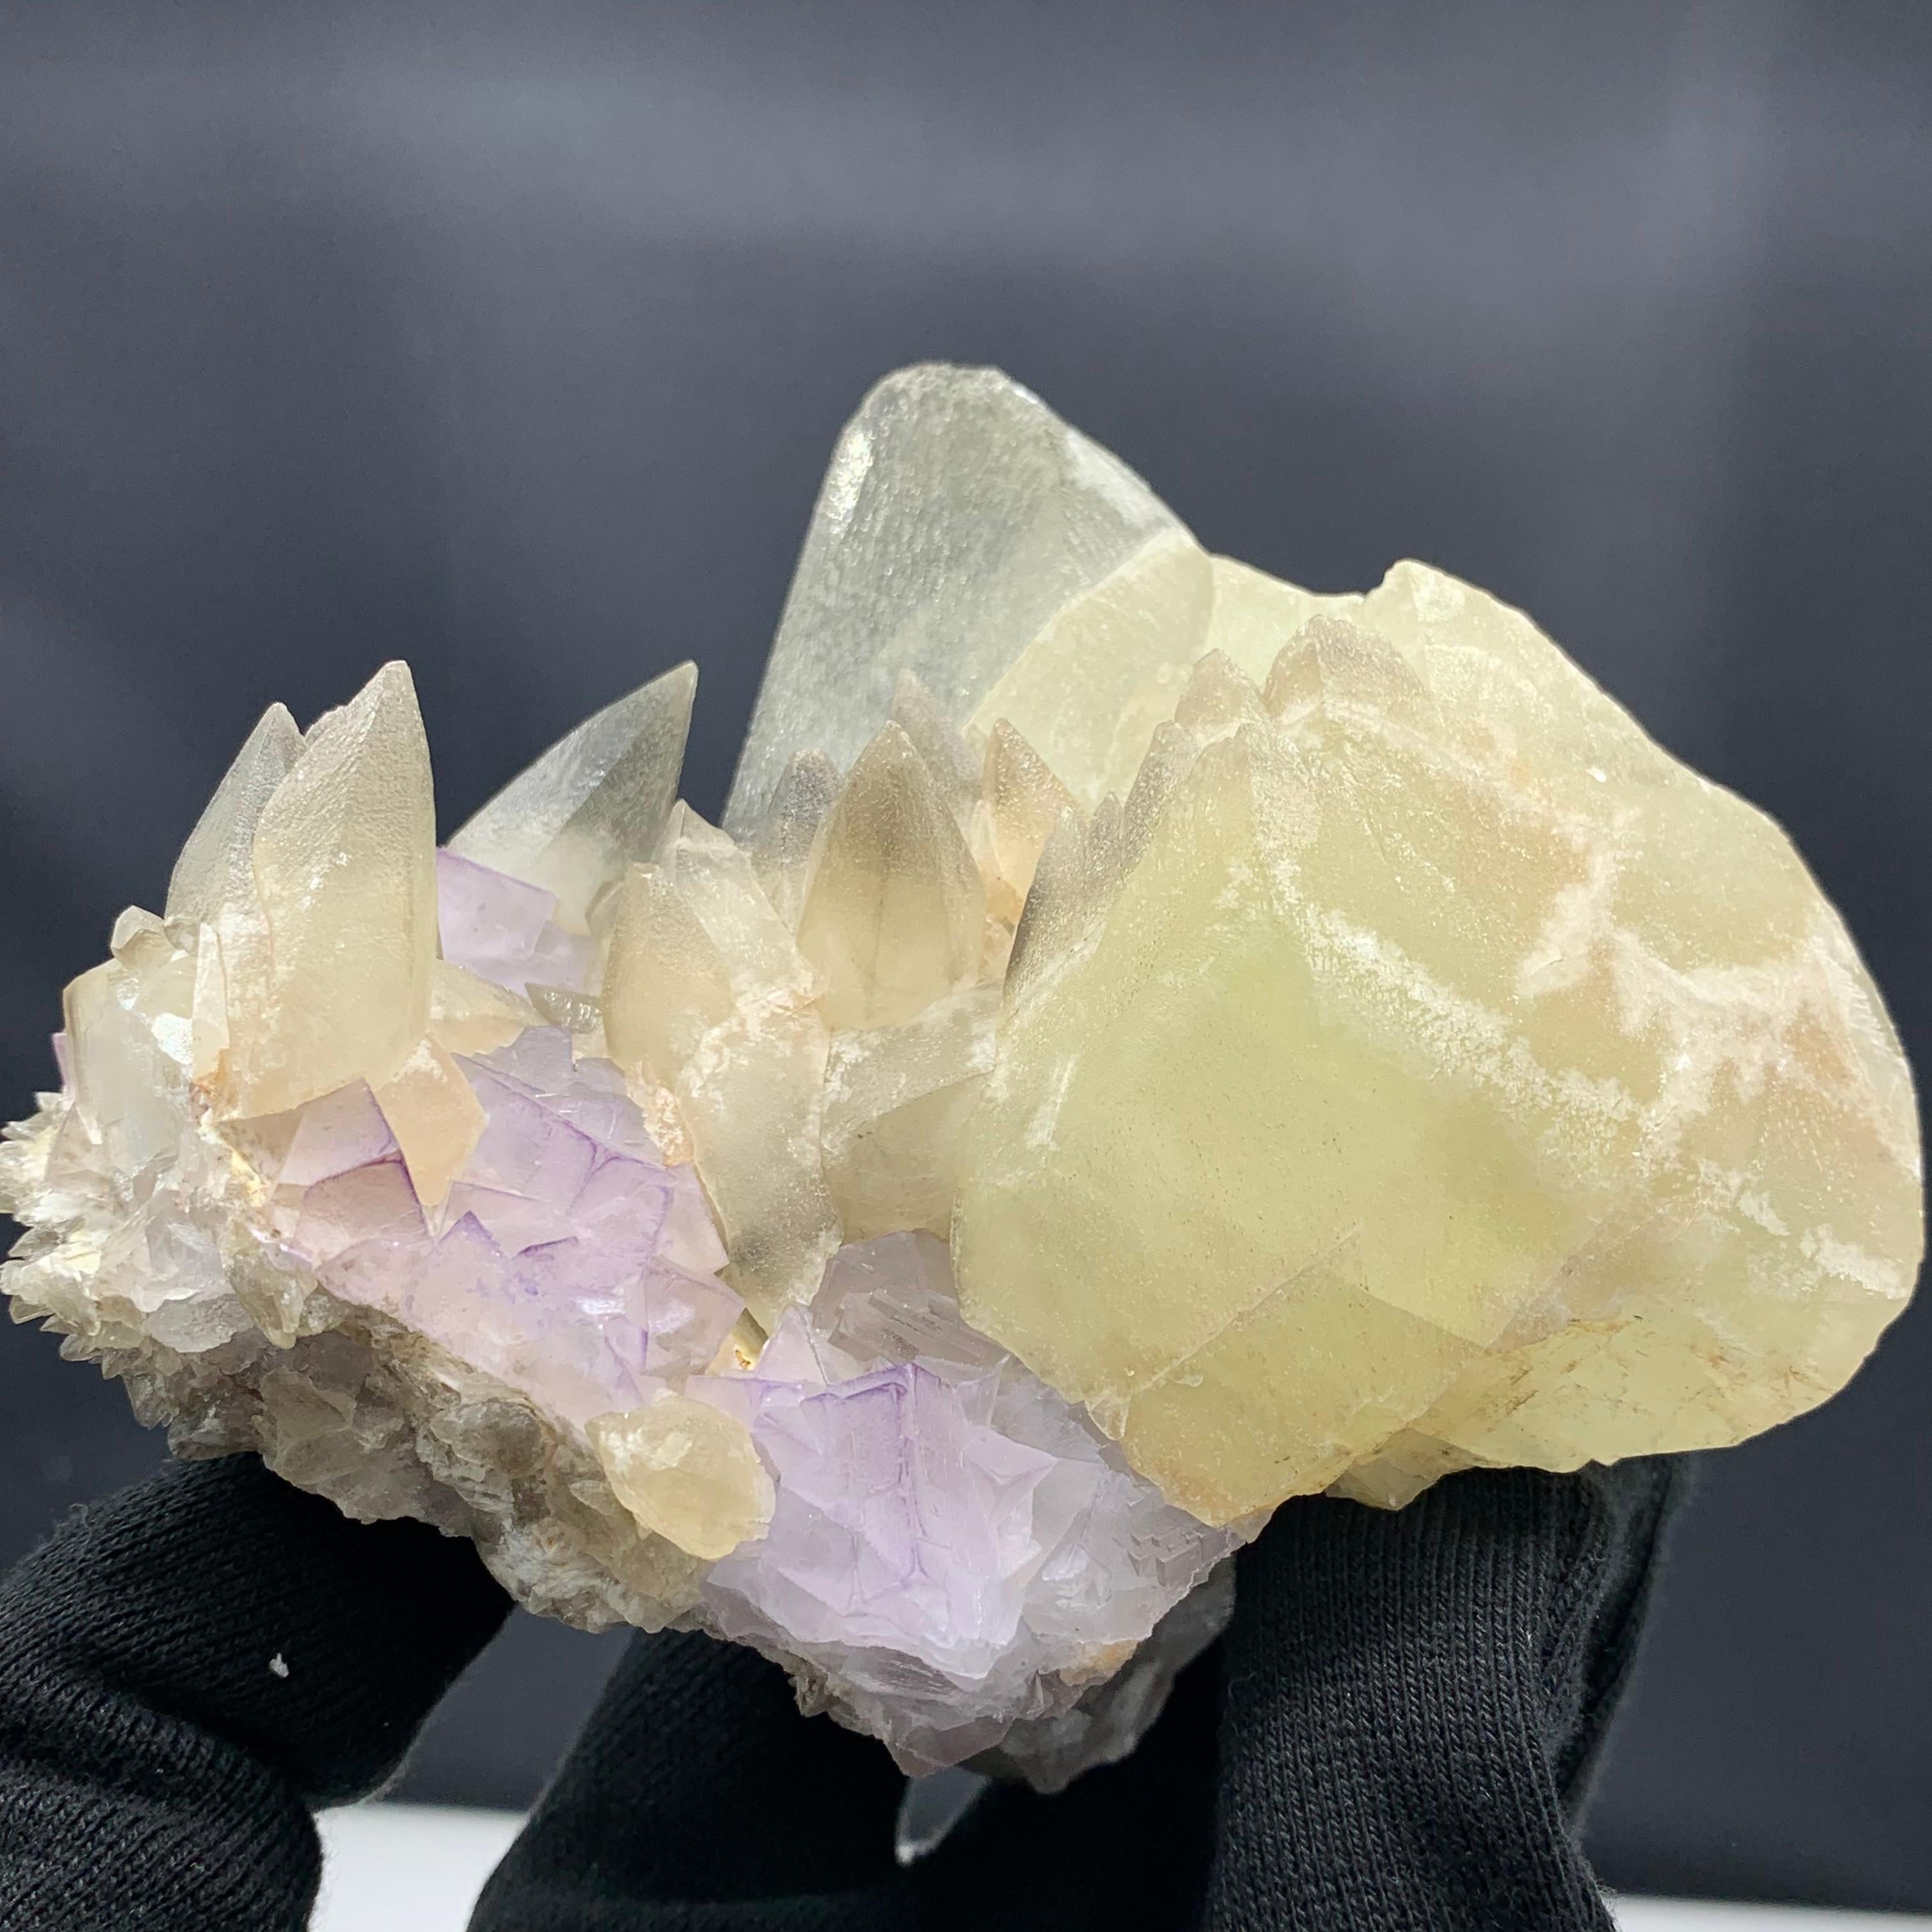 Pakistani 980 Gram Glorious Calcite With Florite Bunch From Balochistan, Pakistan  For Sale